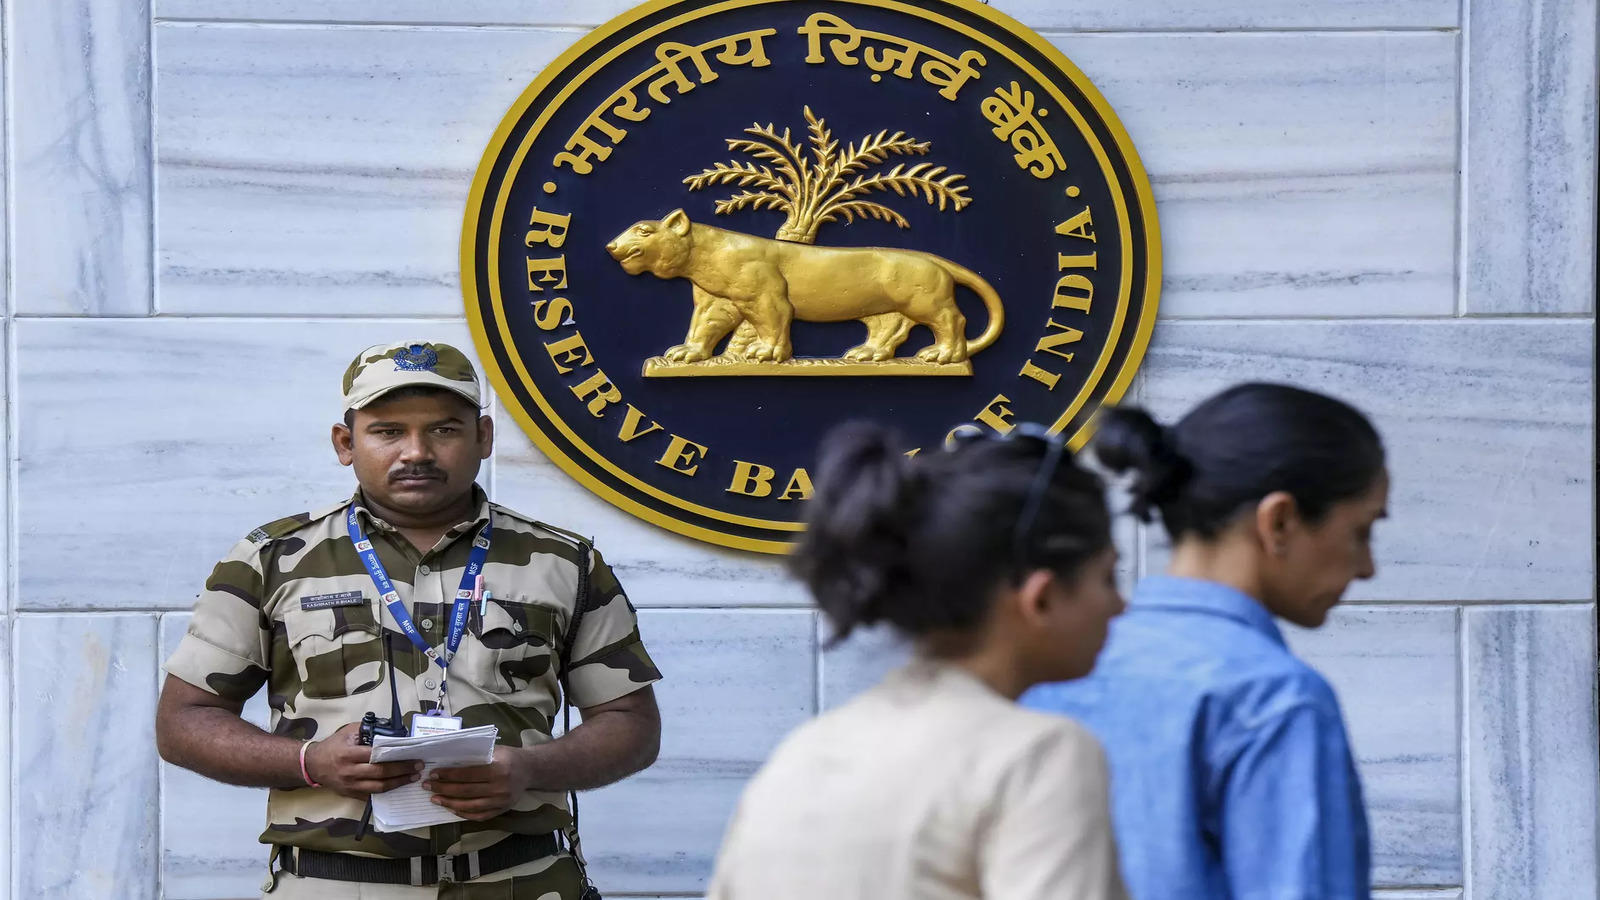 RBI has barred banks and finance companies from charging penal interest, which is often charged from customers for delay in repaying loan installments